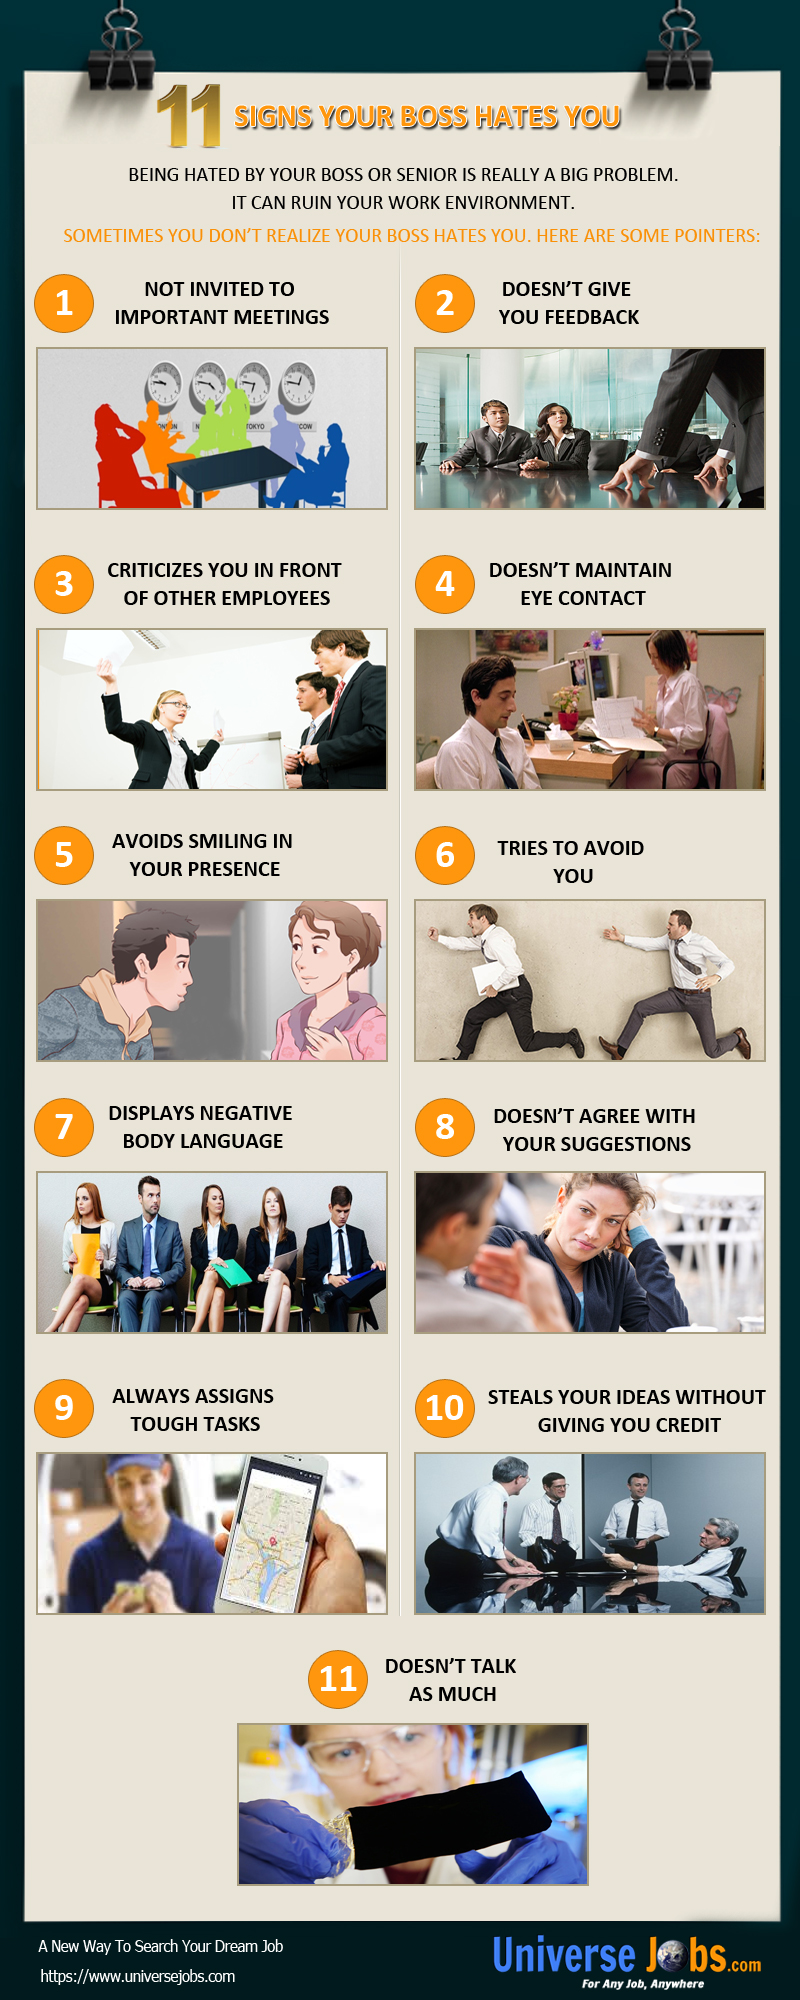 Signs-Your-Boss-Hates-You